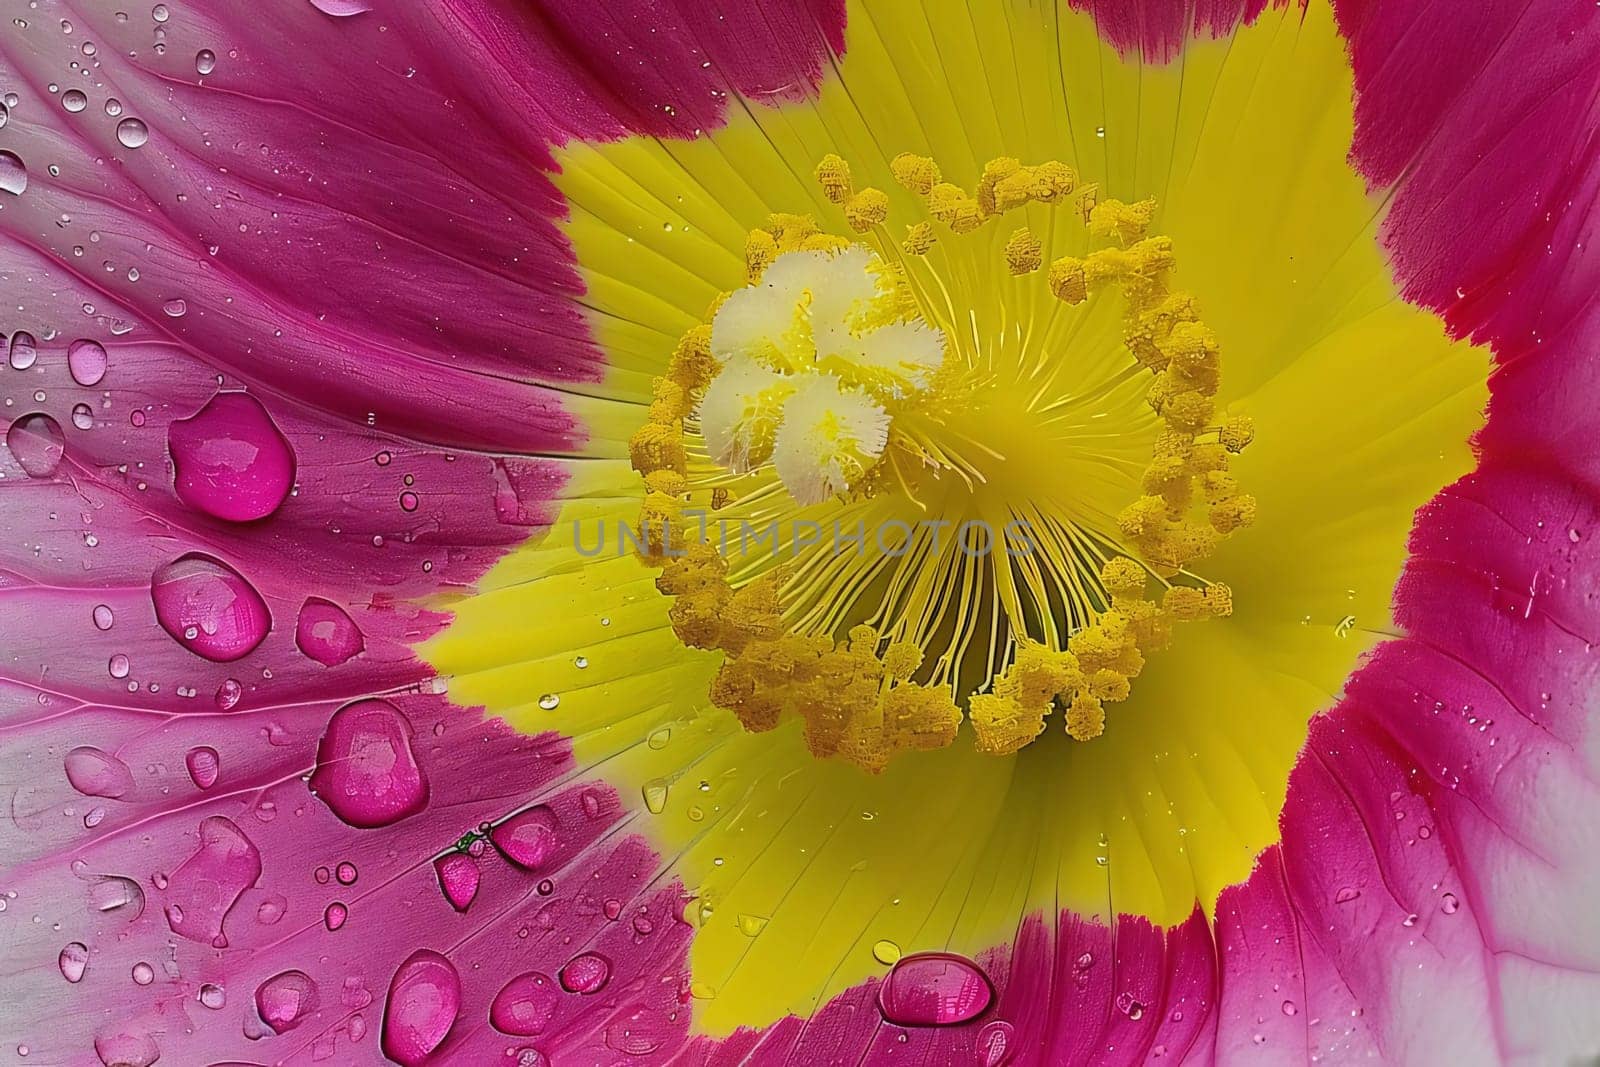 Yellow flower with pink foxes with raindrops of water. Flowering flowers, a symbol of spring, new life. A joyful time of nature waking up to life.